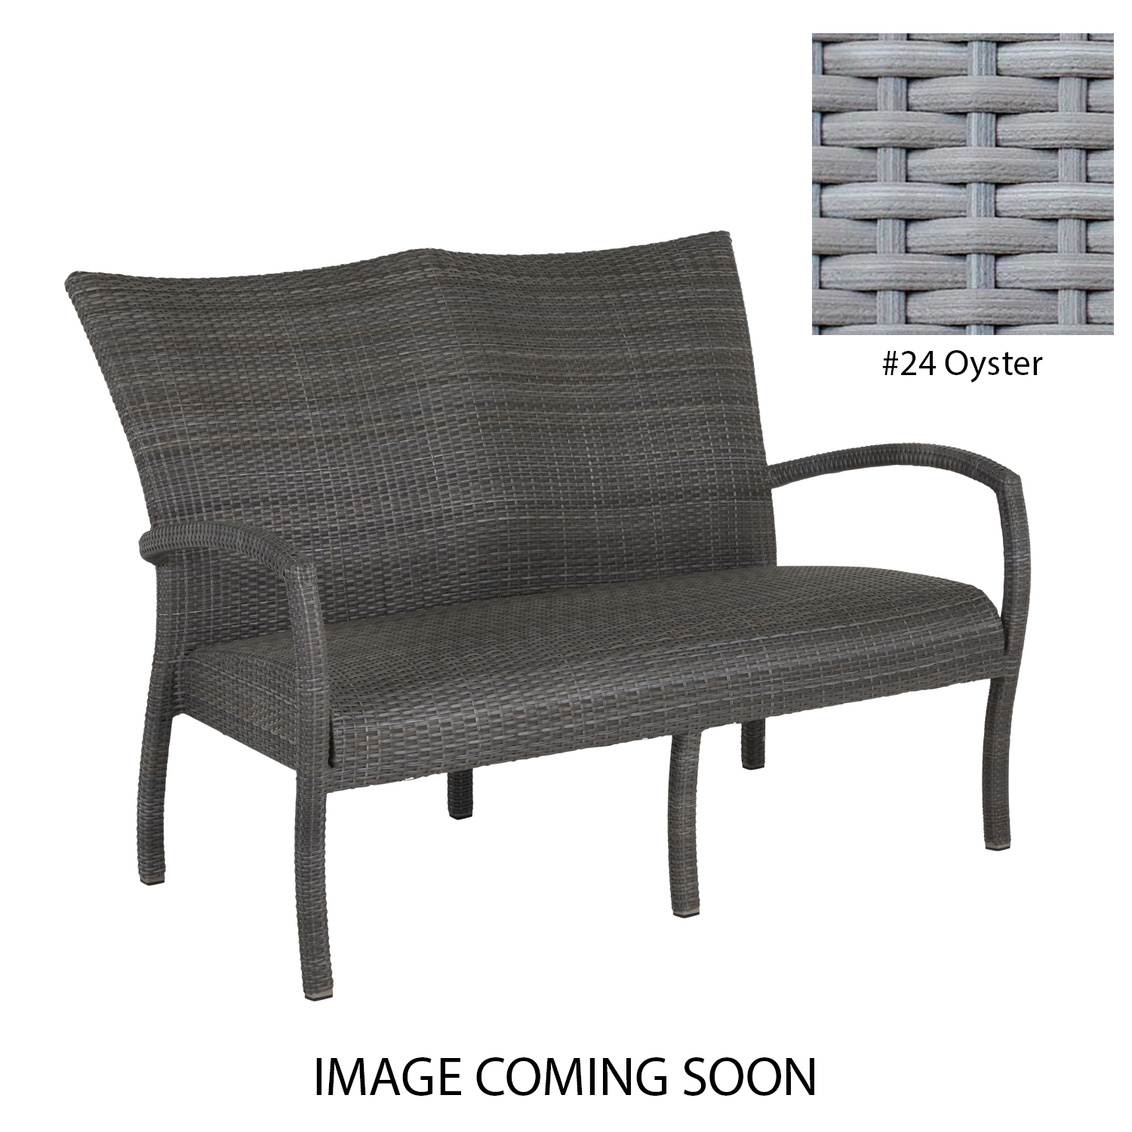 skye plus woven loveseat in oyster product image